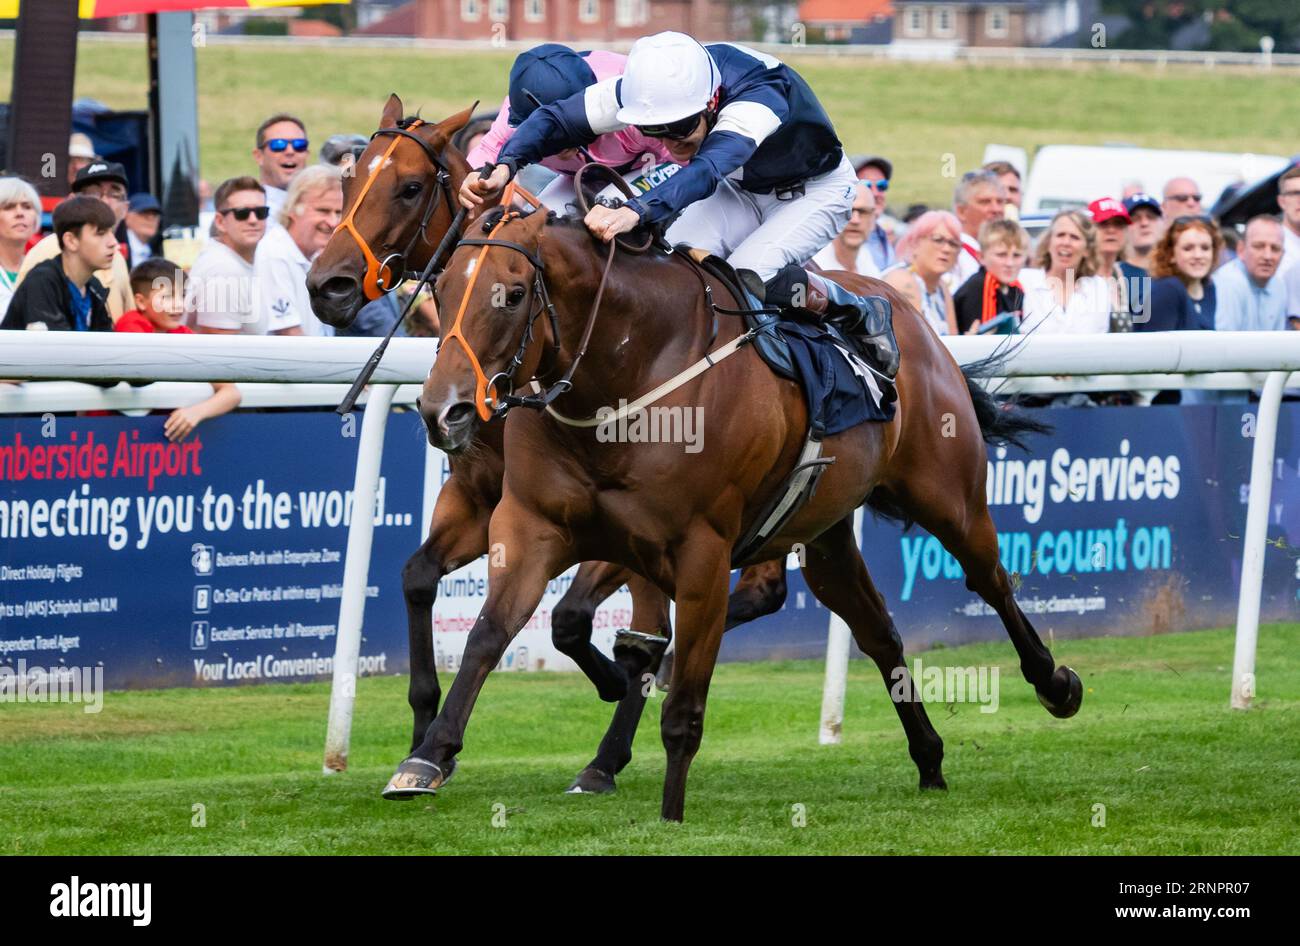 Beverley Racecourse, Beverley, Yorkshire, UK, Saturday September 2nd 2023. Leodis Dream and jockey David Nolan win the Constant Security Handicap Stakes for trainer Paul Midgley and owners The Beer Stalker & Partner. Credit JTW Equine Images / Alamy Live News. Stock Photo